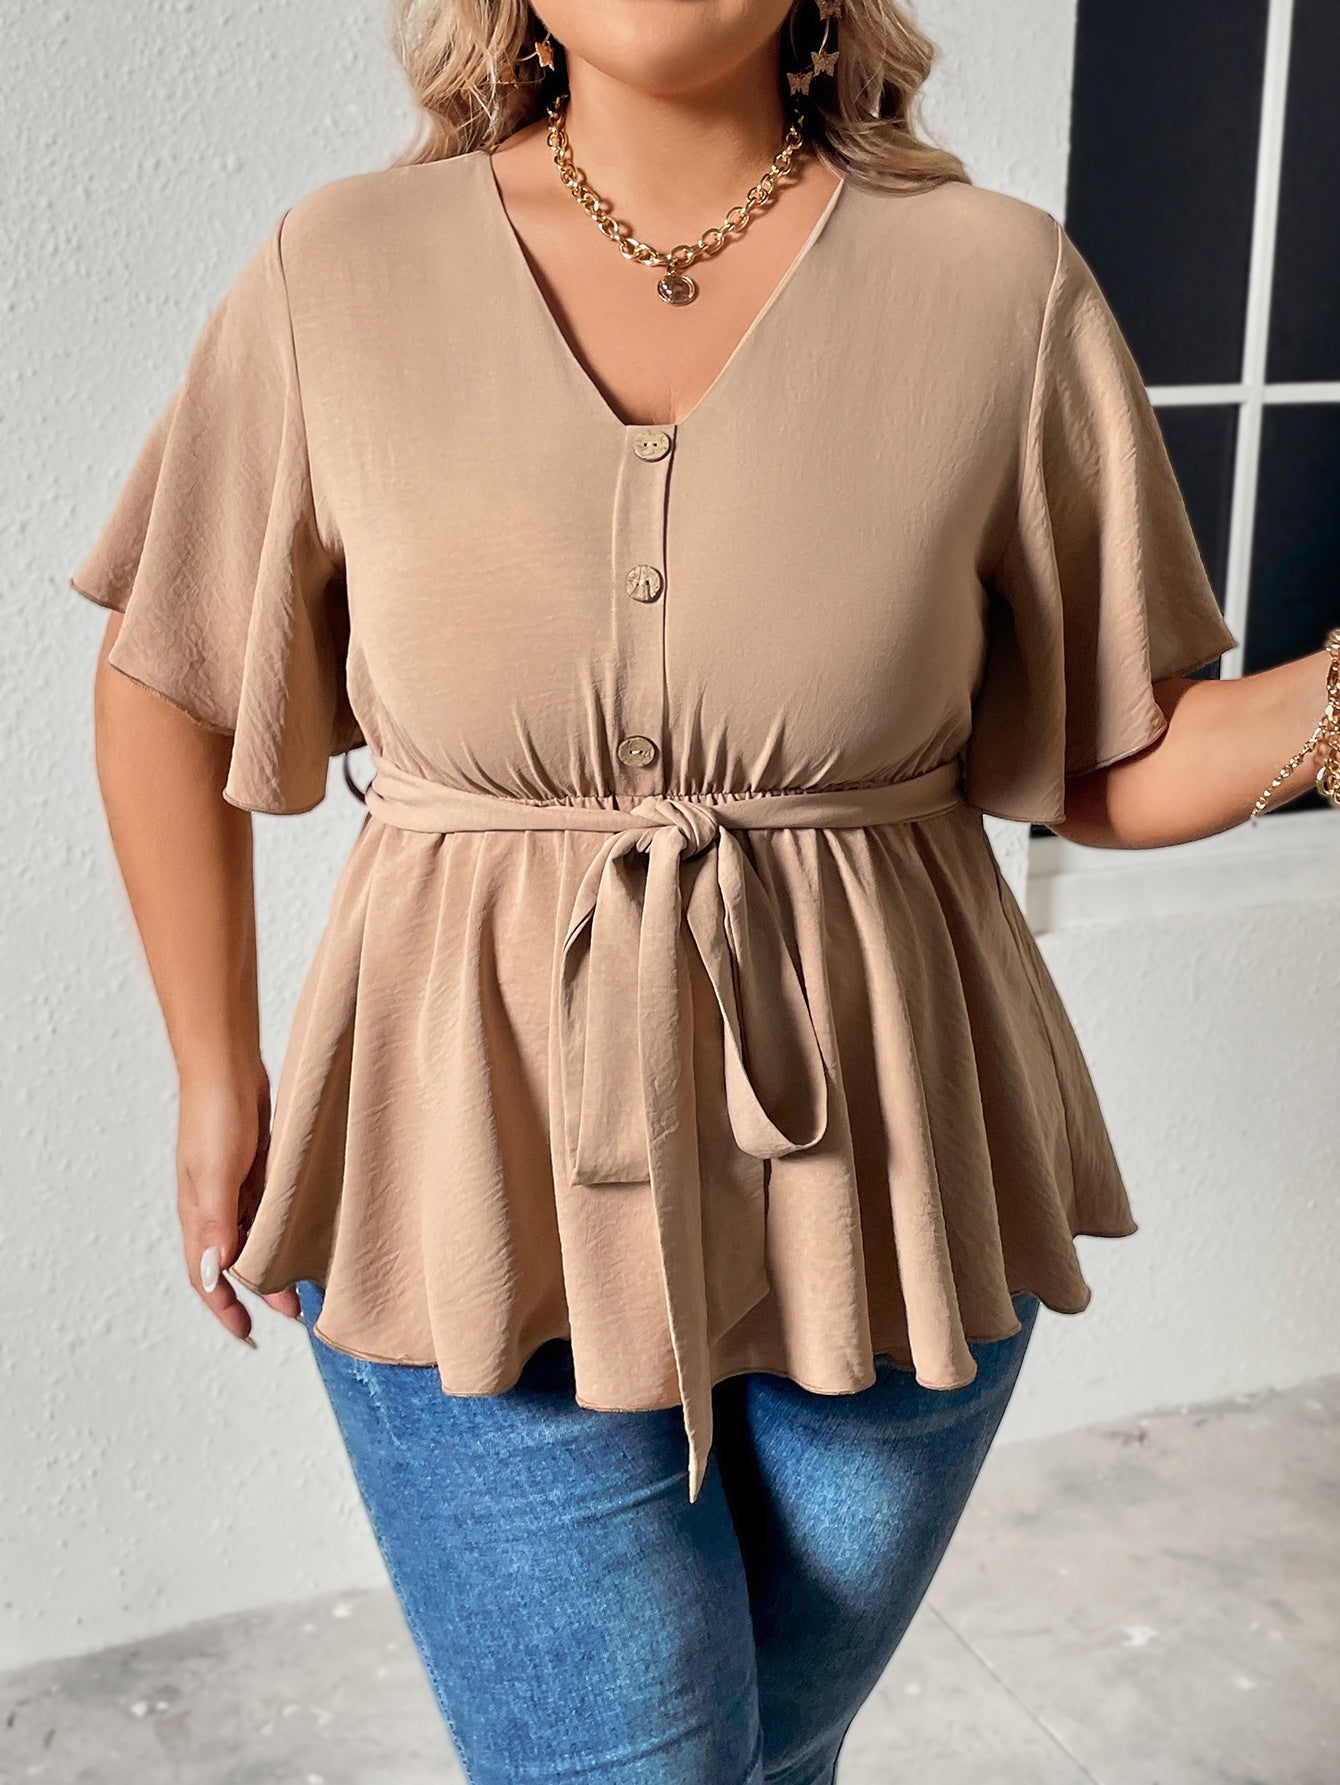 Plus Size Popular Summer V neck Slimming Casual Women Top